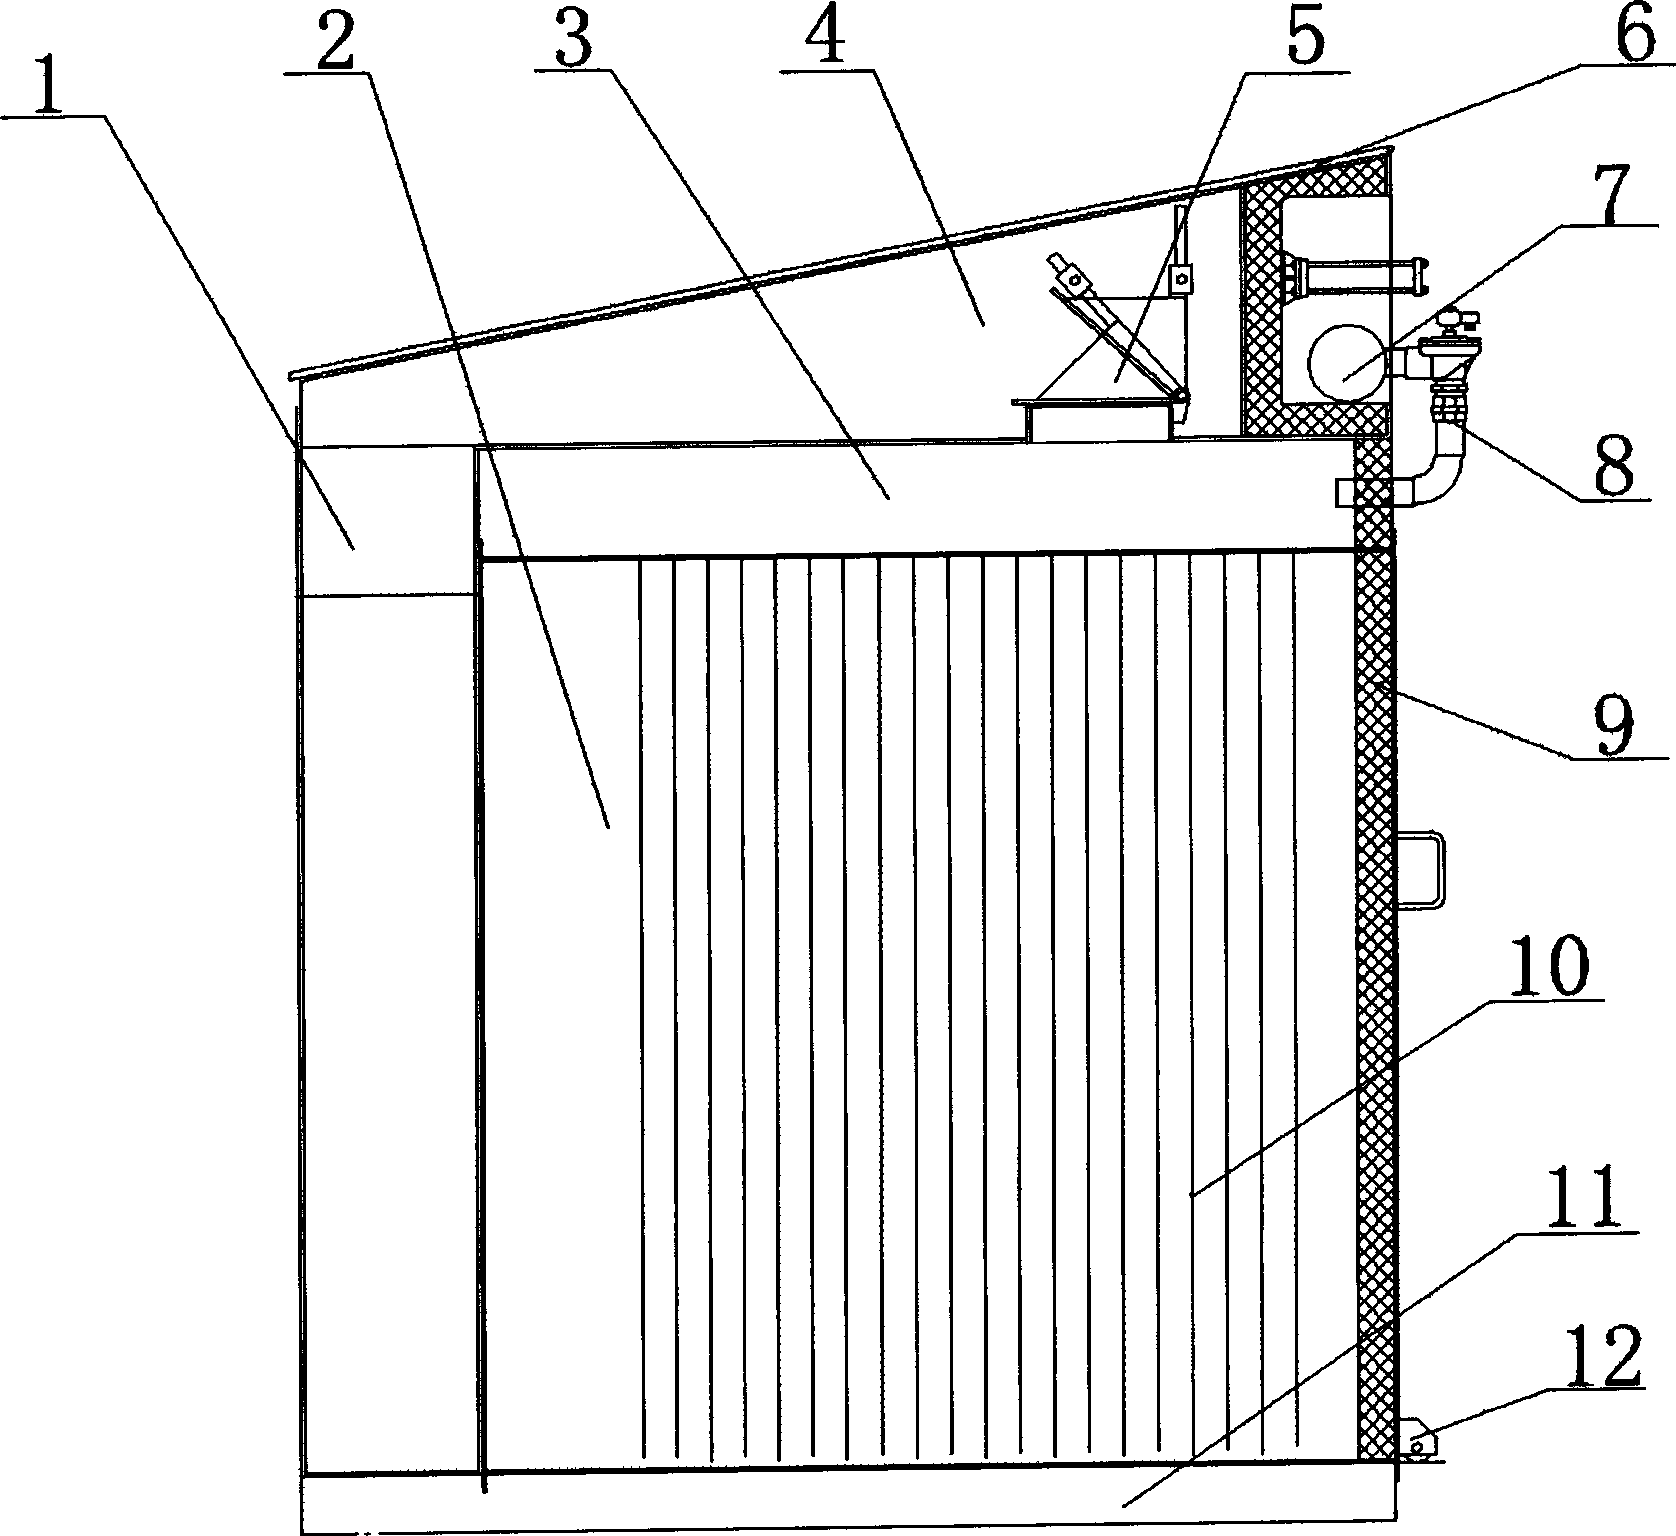 Dust collection unit of cloth bag type dust collector